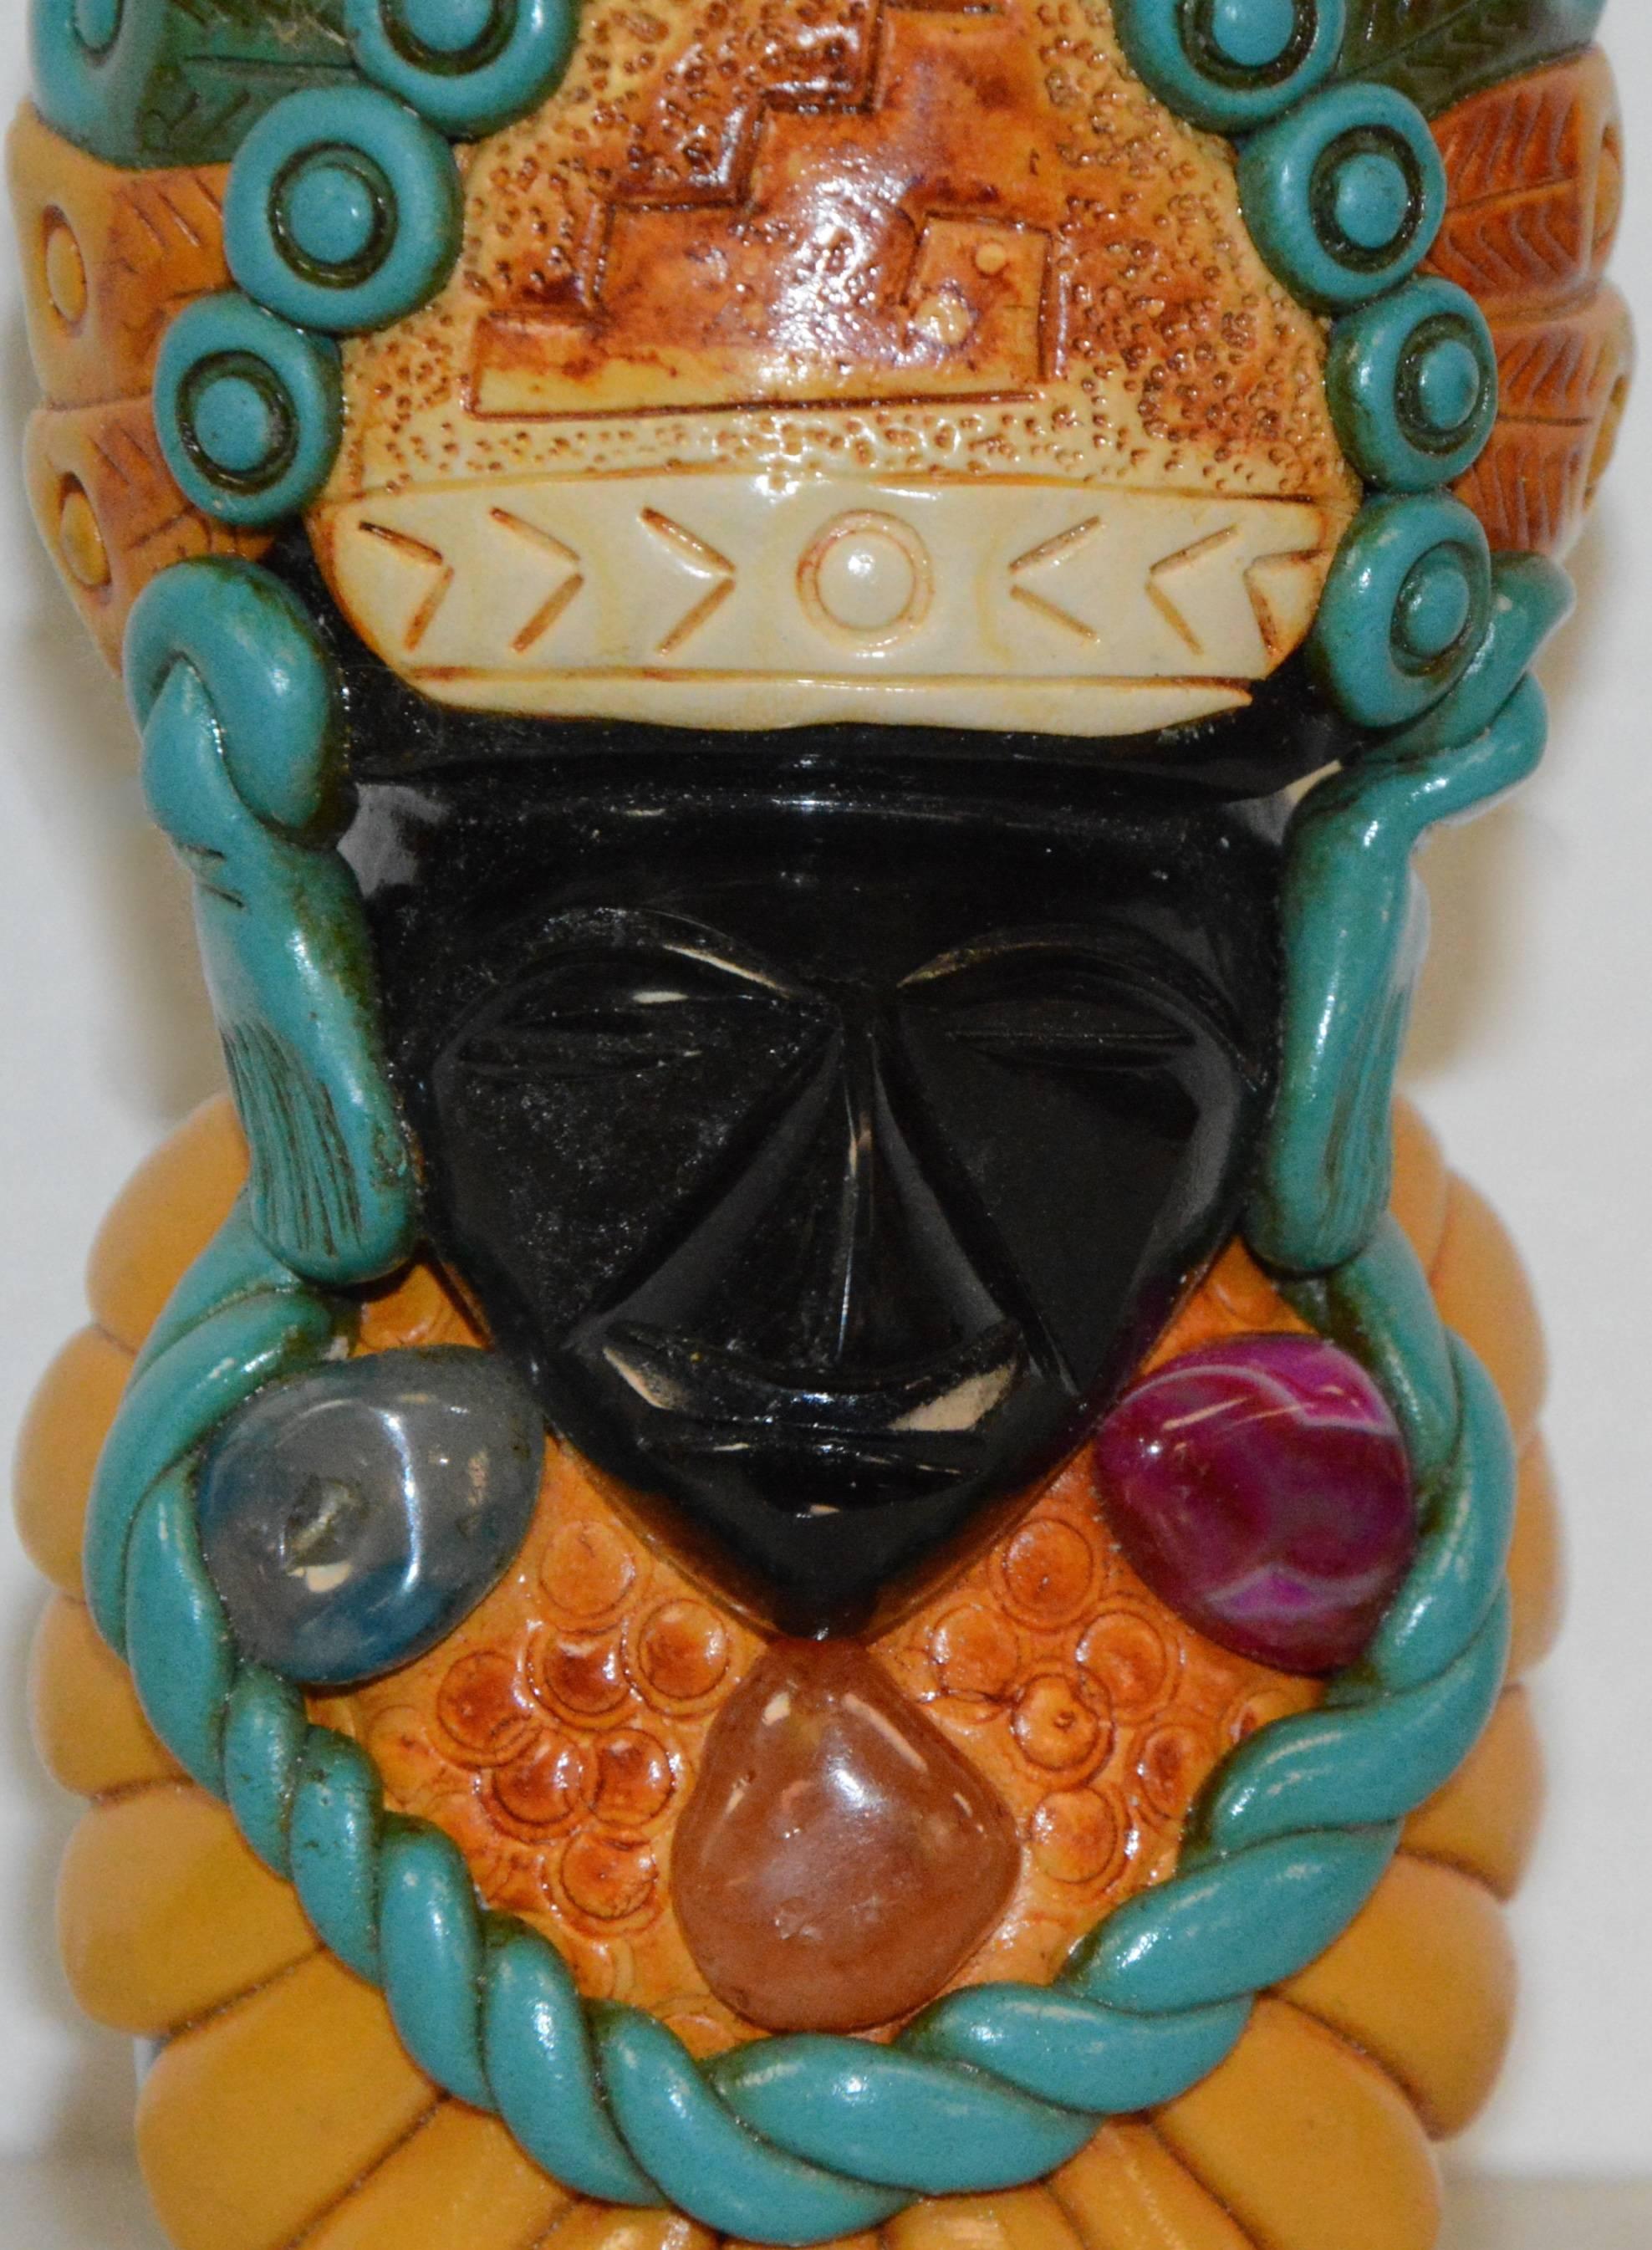 Carved Onyx Statuette with Embellishments In Fair Condition For Sale In Cookeville, TN